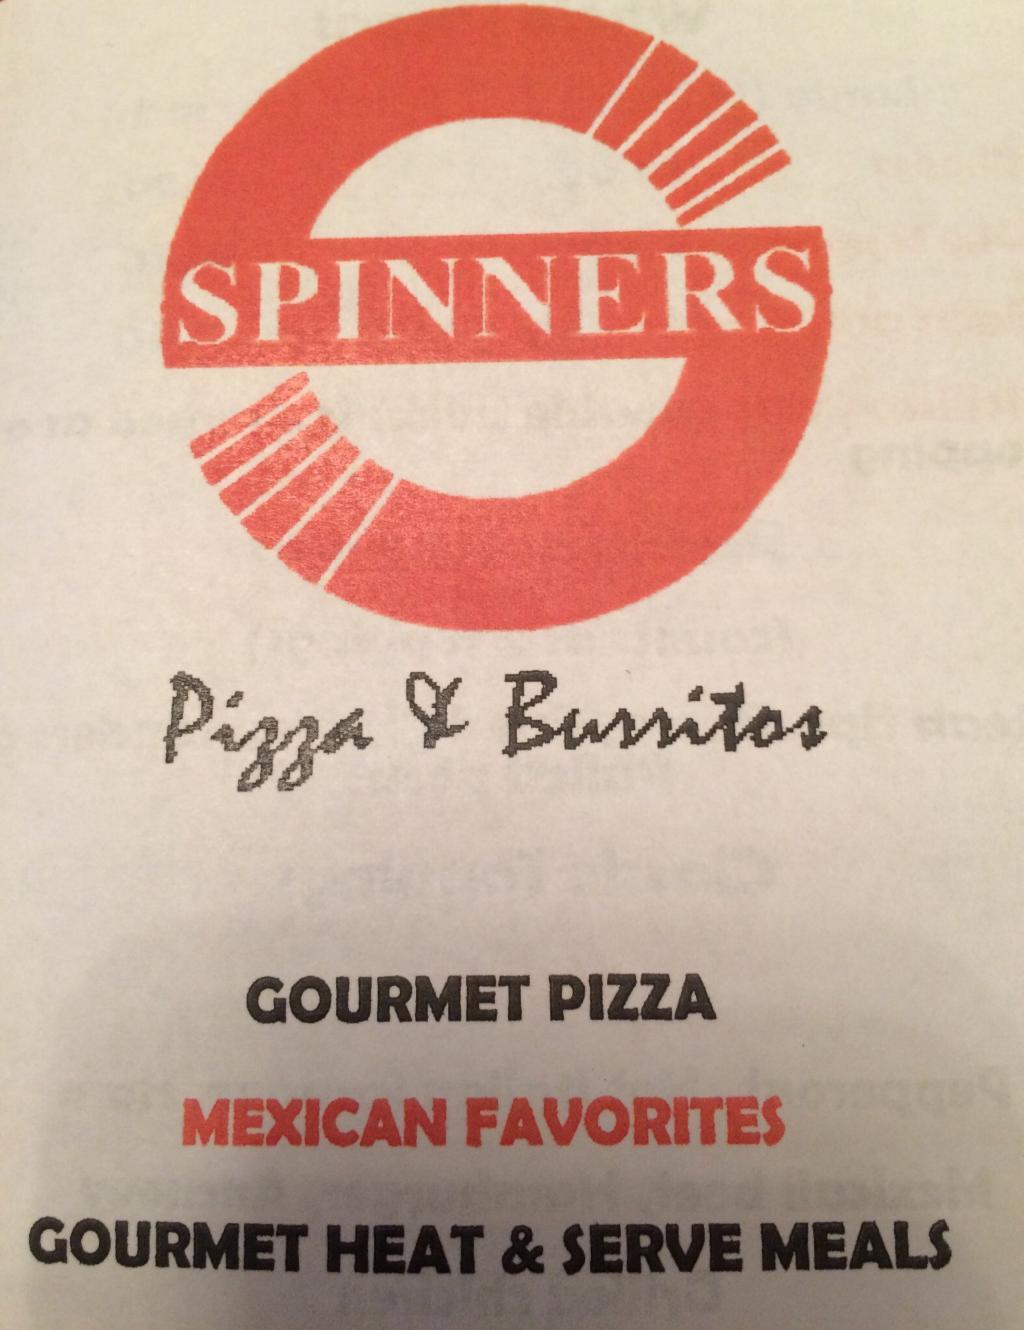 Spinner Pizza & Buritto